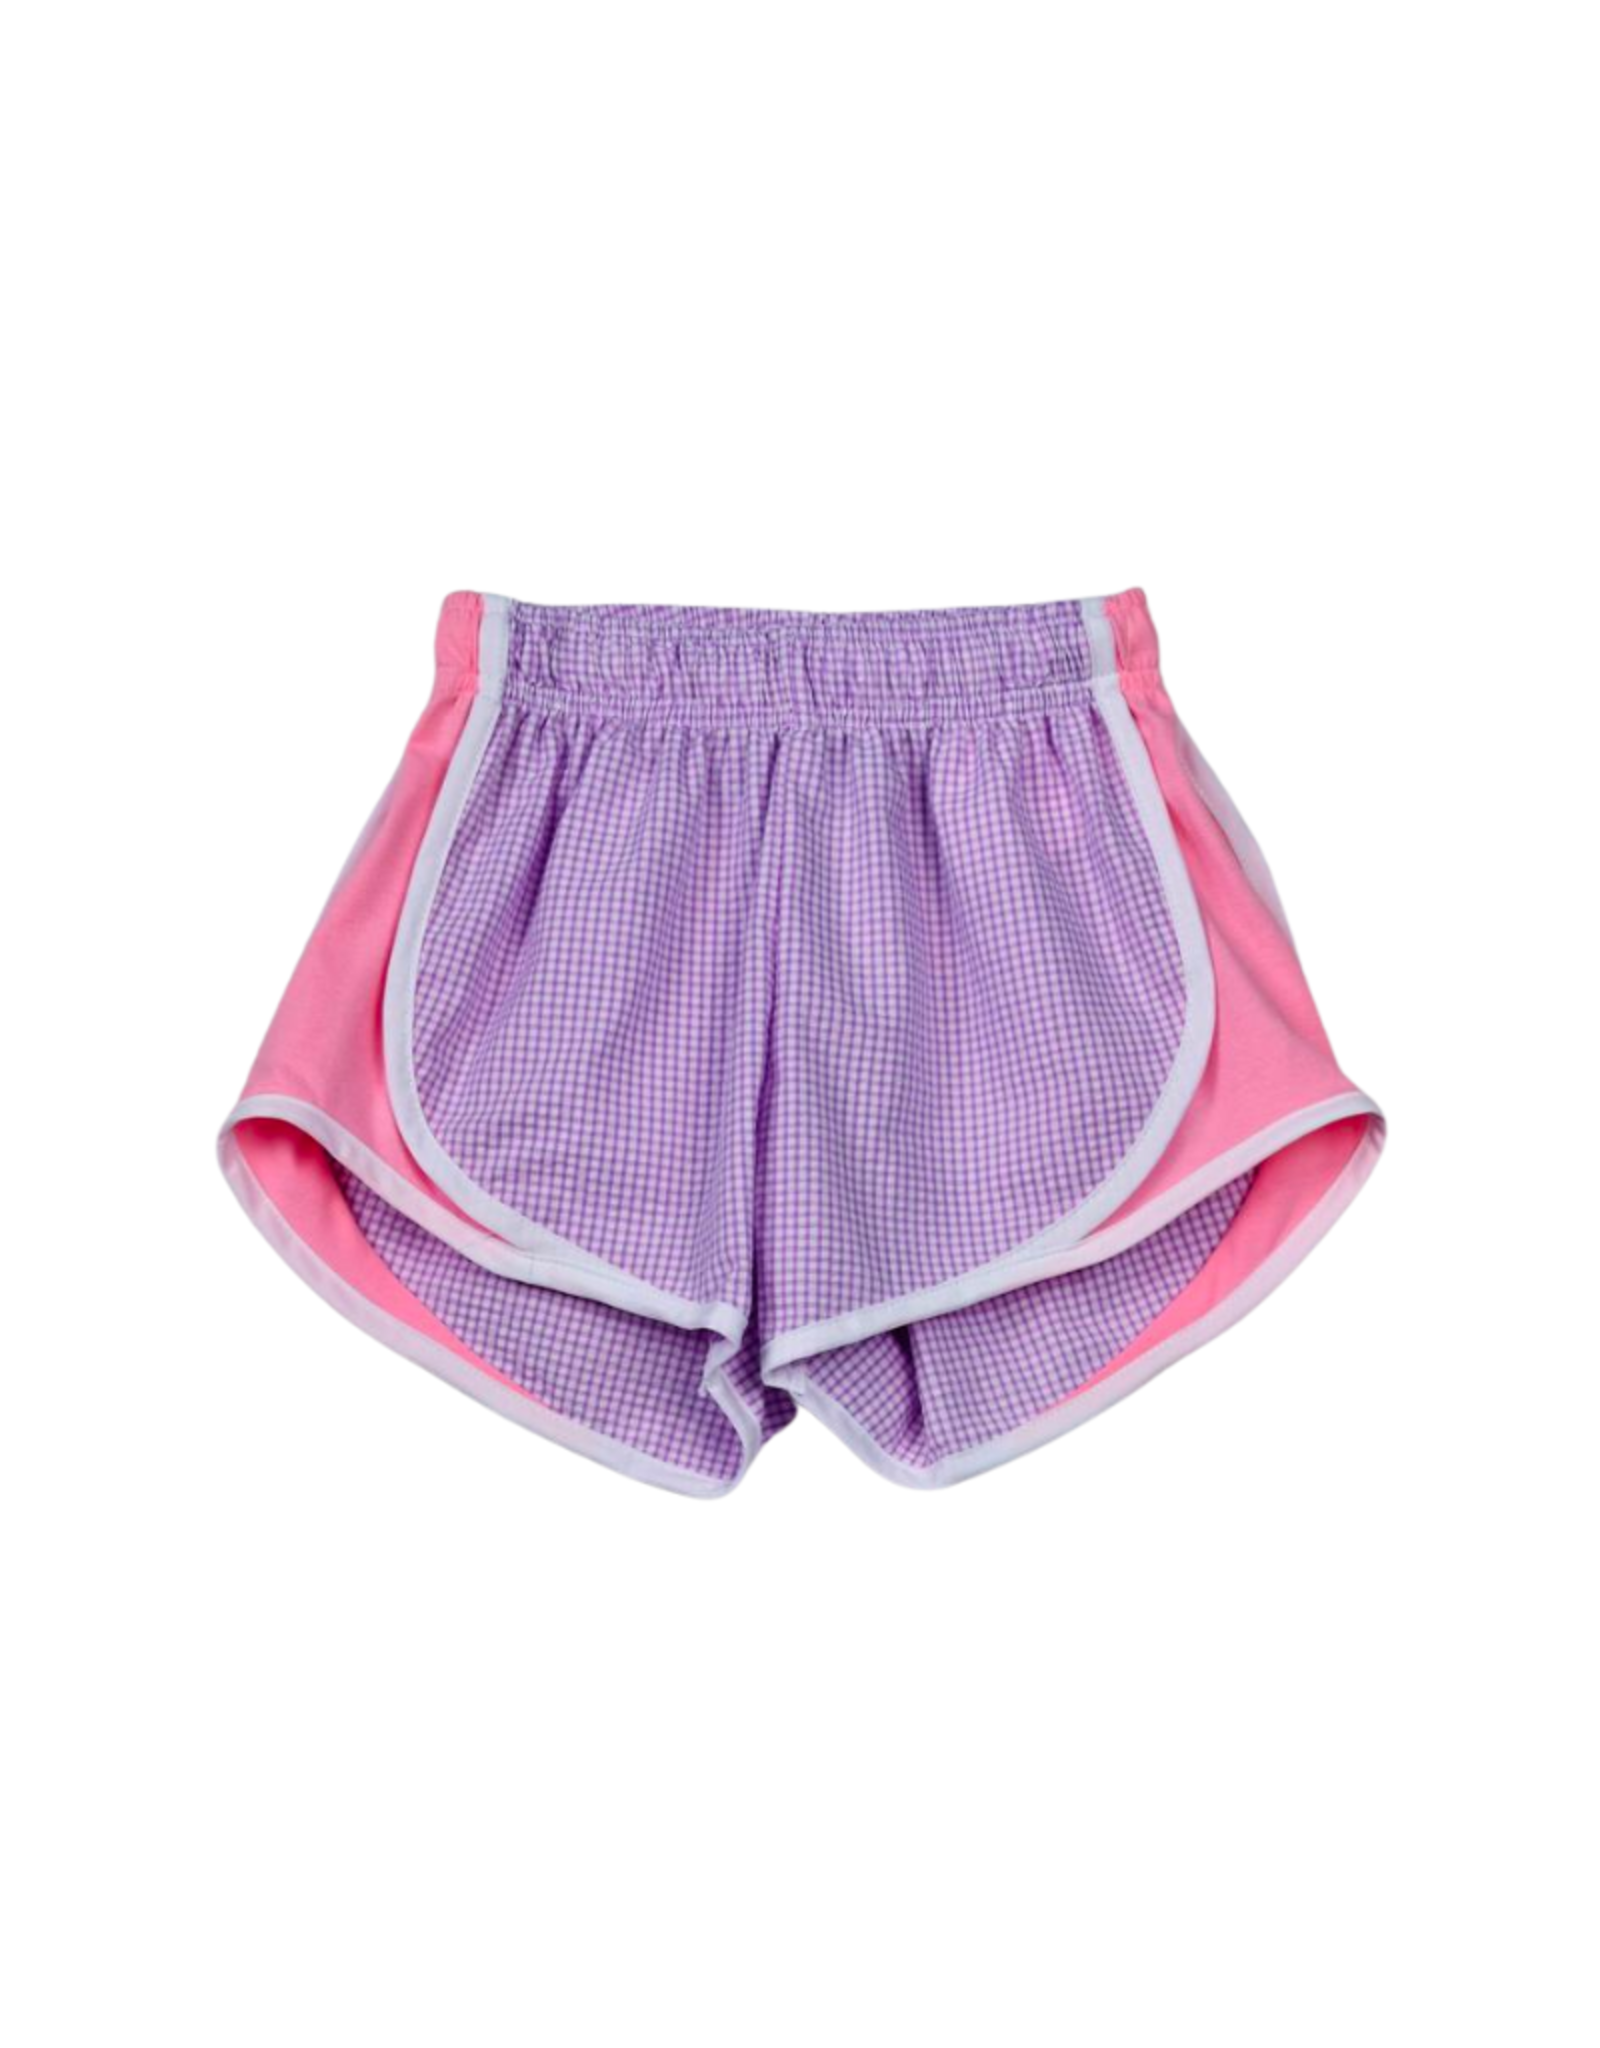 Lavender Check Seersucker Shorts with Pink Side